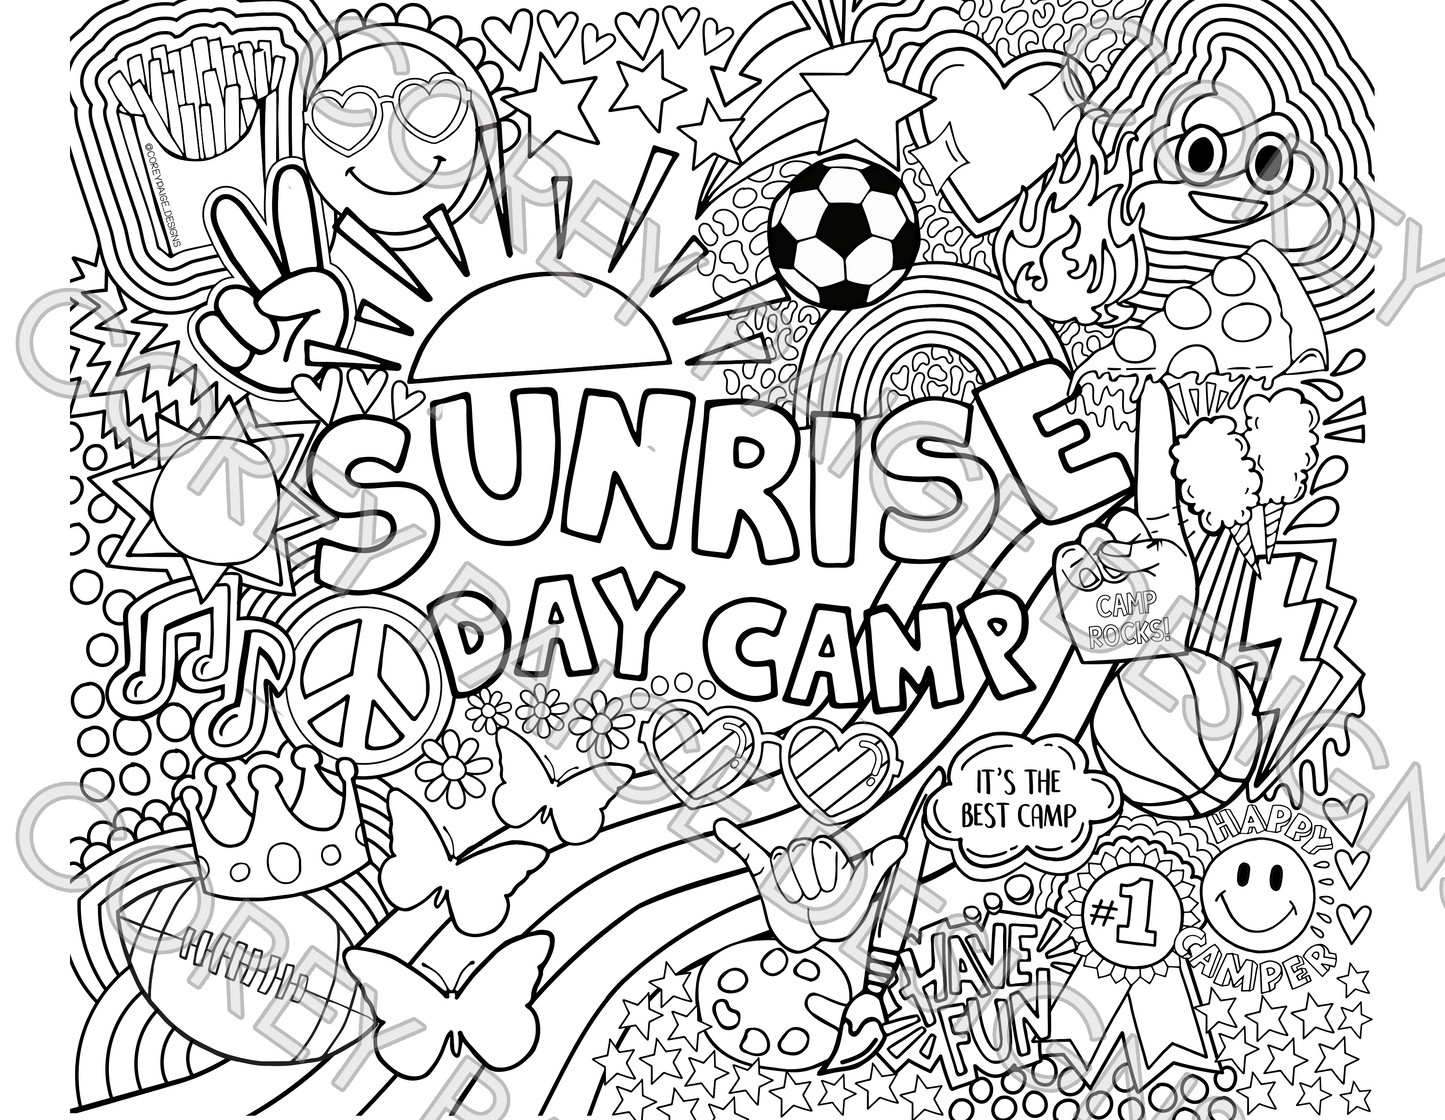 Sunrise Day Camp Coloring Sheet Pack